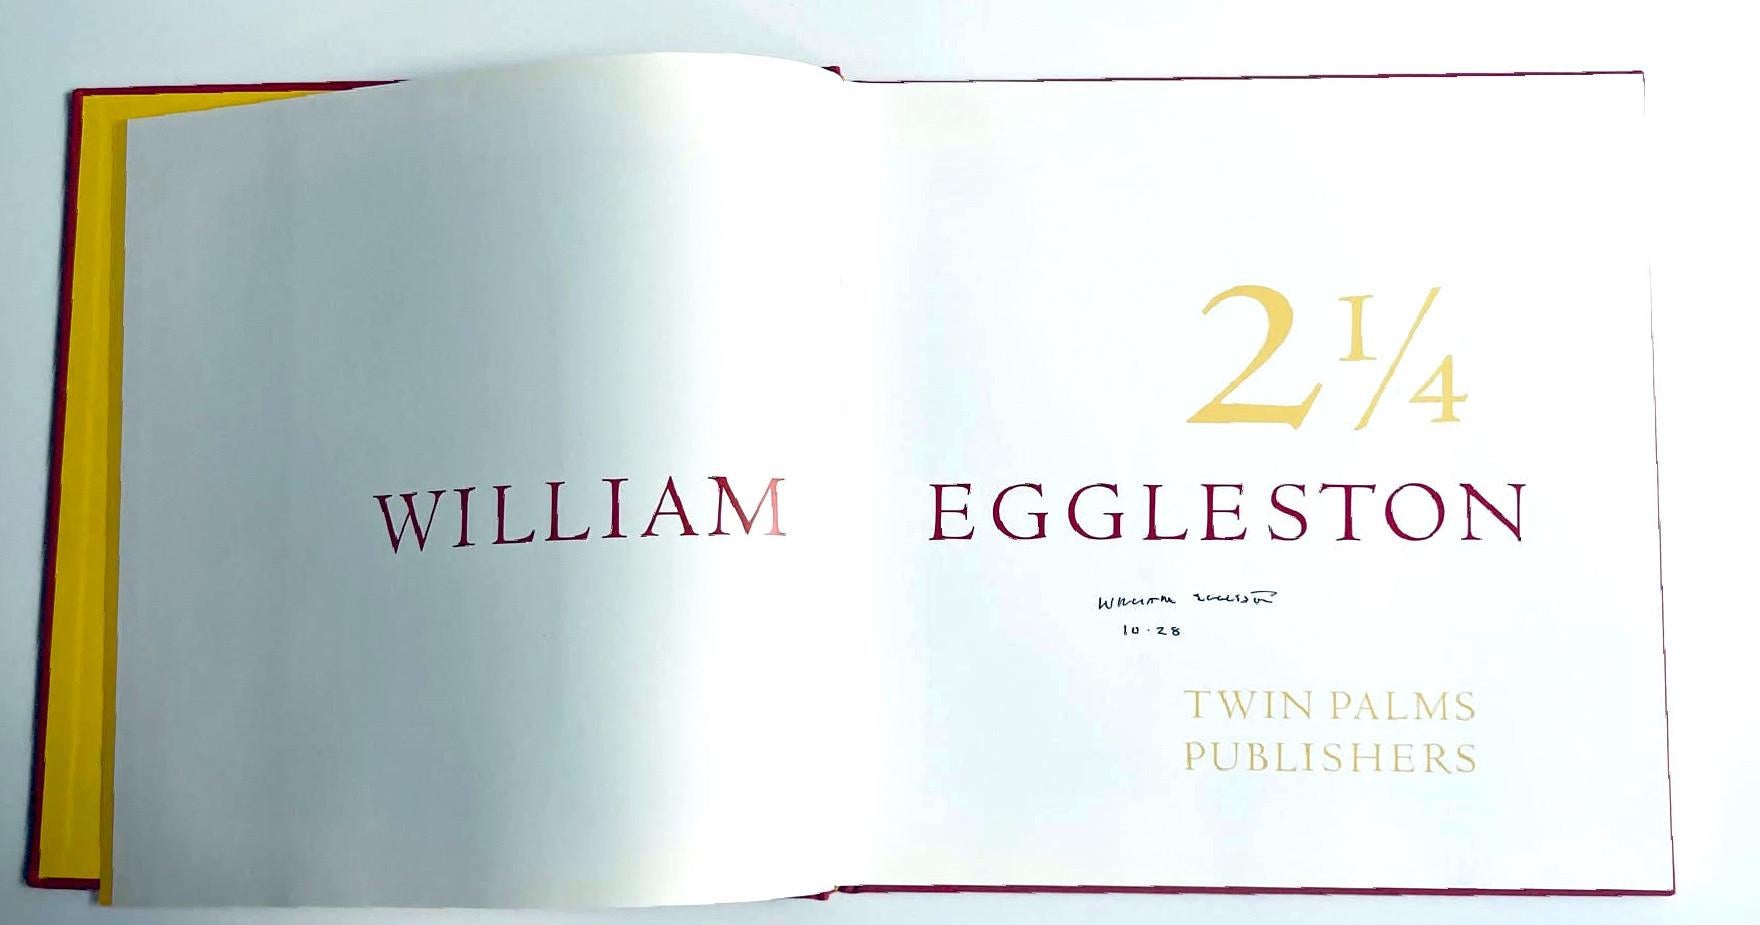 William Eggleston
2 1/4 Eggleston (Hand signed by William Eggleston), 2011
Fifth Edition hardback monograph cloth-bounded with tipped-in image to cover, hand signed in black marker by the artist
Hand signed and dated in black marker by William